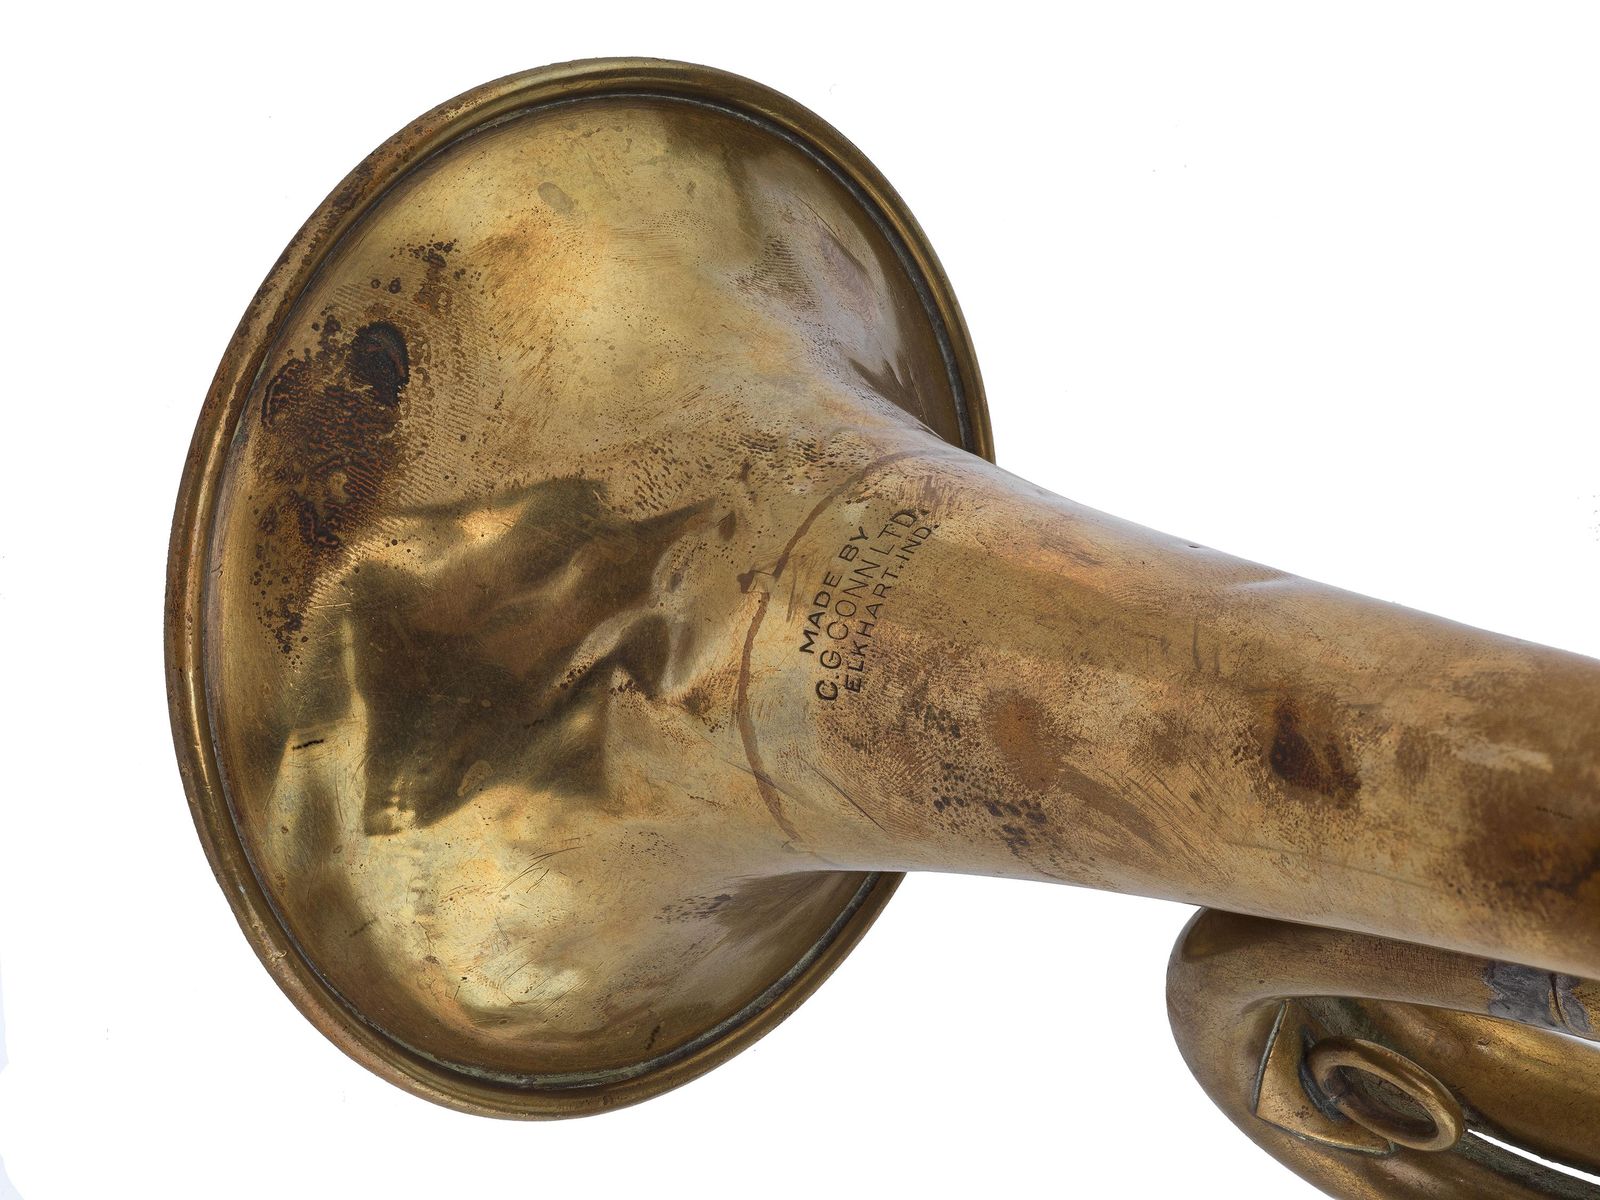 World war 1 bugle. How do I get the mouthpiece unstuck? And should I clean  the bugle? Any advice would help! : r/trumpet